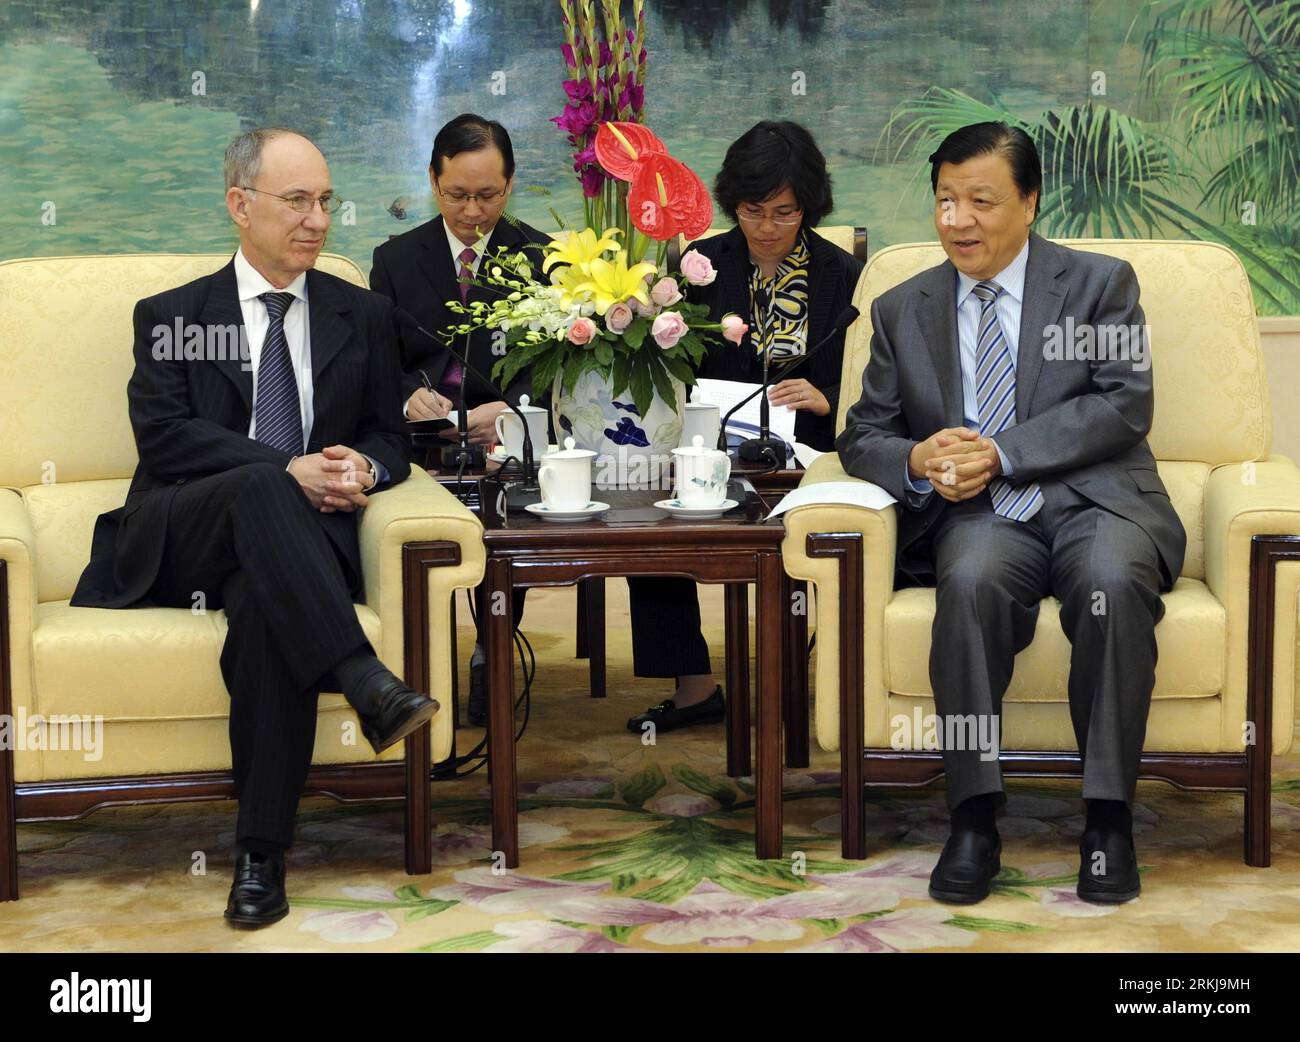 Bildnummer: 56056811  Datum: 21.09.2011  Copyright: imago/Xinhua (110921) -- BEIJING, Sept. 21, 2011 (Xinhua) -- Liu Yunshan (R, Front), head of the Publicity Department of the Communist Party of China (CPC) Central Committee and a member of the Political Bureau of the CPC Central Committee, meets with Rui Falcao (L, Front), chairman of Brazil s ruling Workers Party (PT), in Beijing, capital of China, Sept. 21, 2011. Falcao came to Beijing to attend the fourth CPC-PT joint seminar. (Xinhua/Rao Aimin) (ljh) CHINA-BEIJING-LIU YUNSHAN-PT CHAIRMAN-MEETING (CN) PUBLICATIONxNOTxINxCHN People Politik Stock Photo